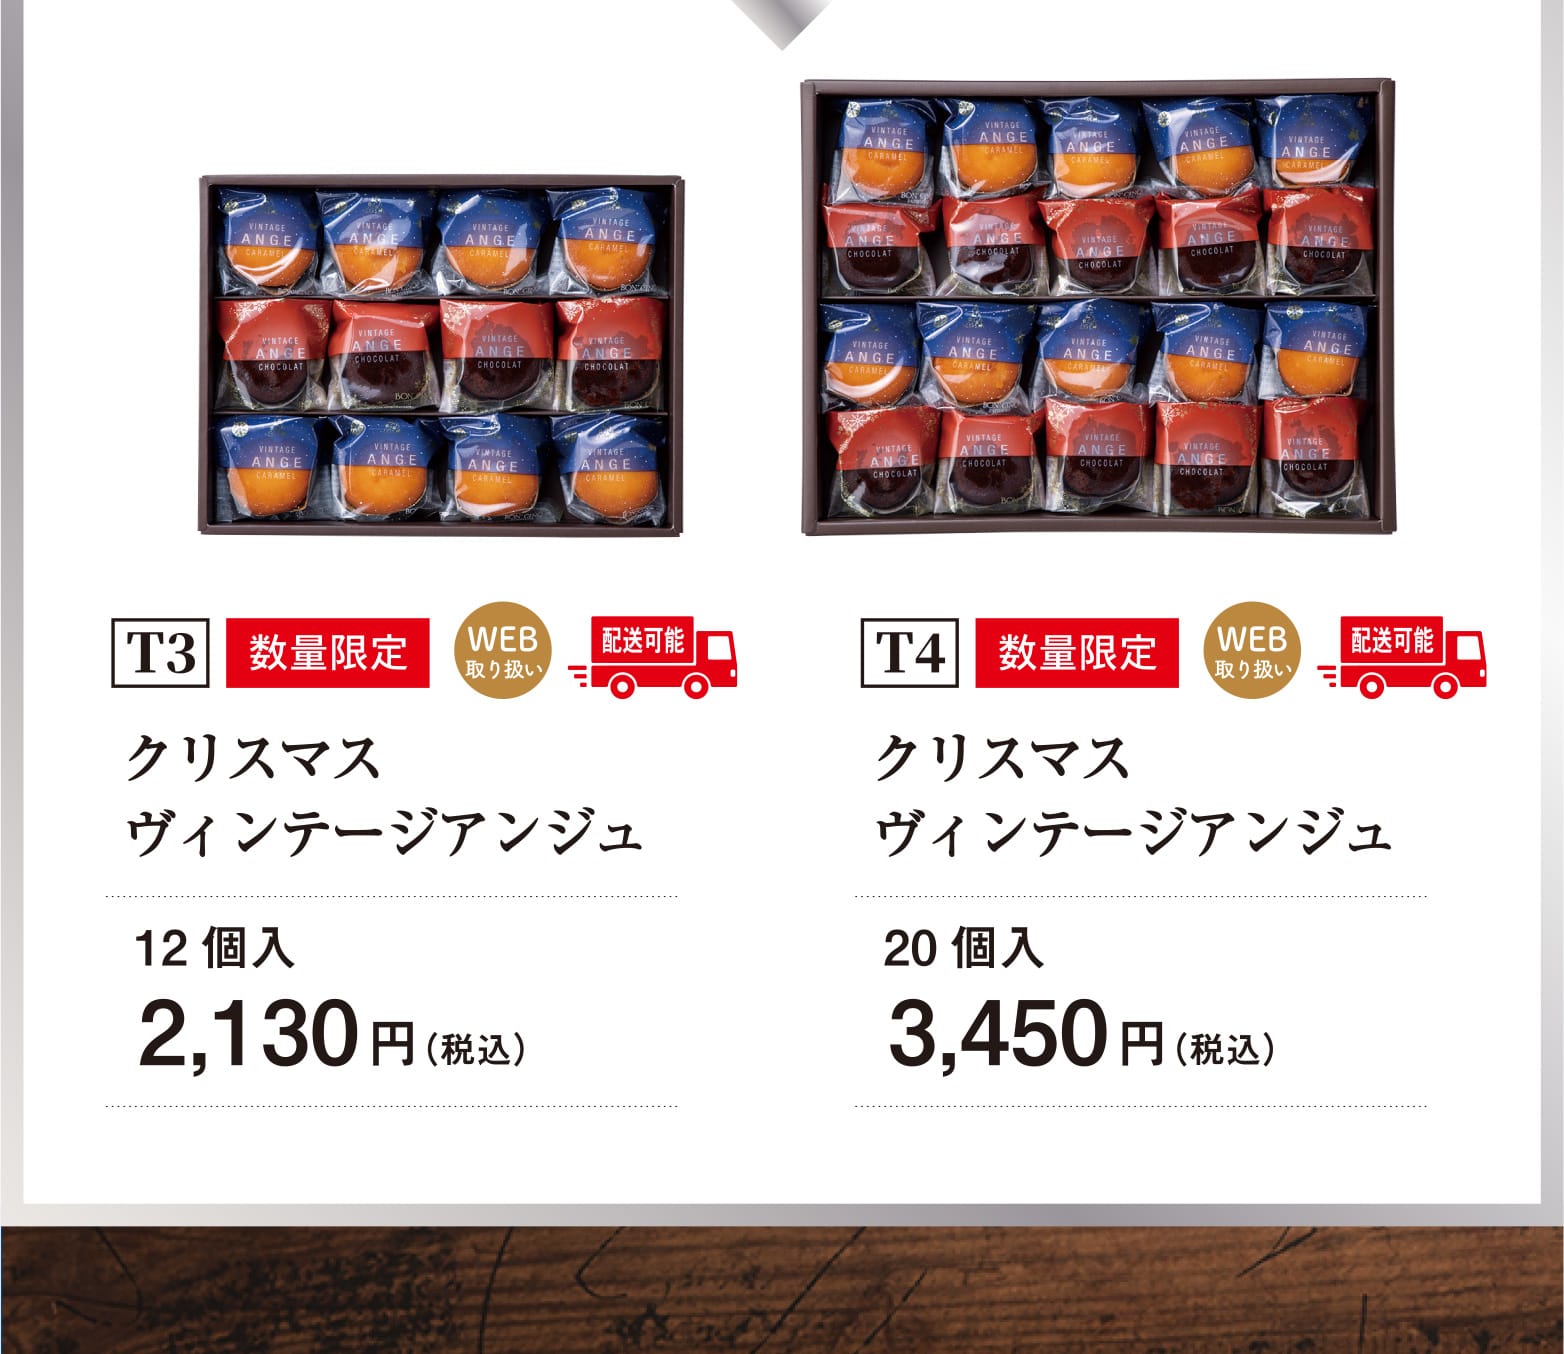 T1：数量限定,配送可能 クリスマスヴィンテージアンジュ 12個入 2,130円（税込）/T1：数量限定,配送可能 クリスマスヴィンテージアンジュ 20個入 3,450円（税込）/